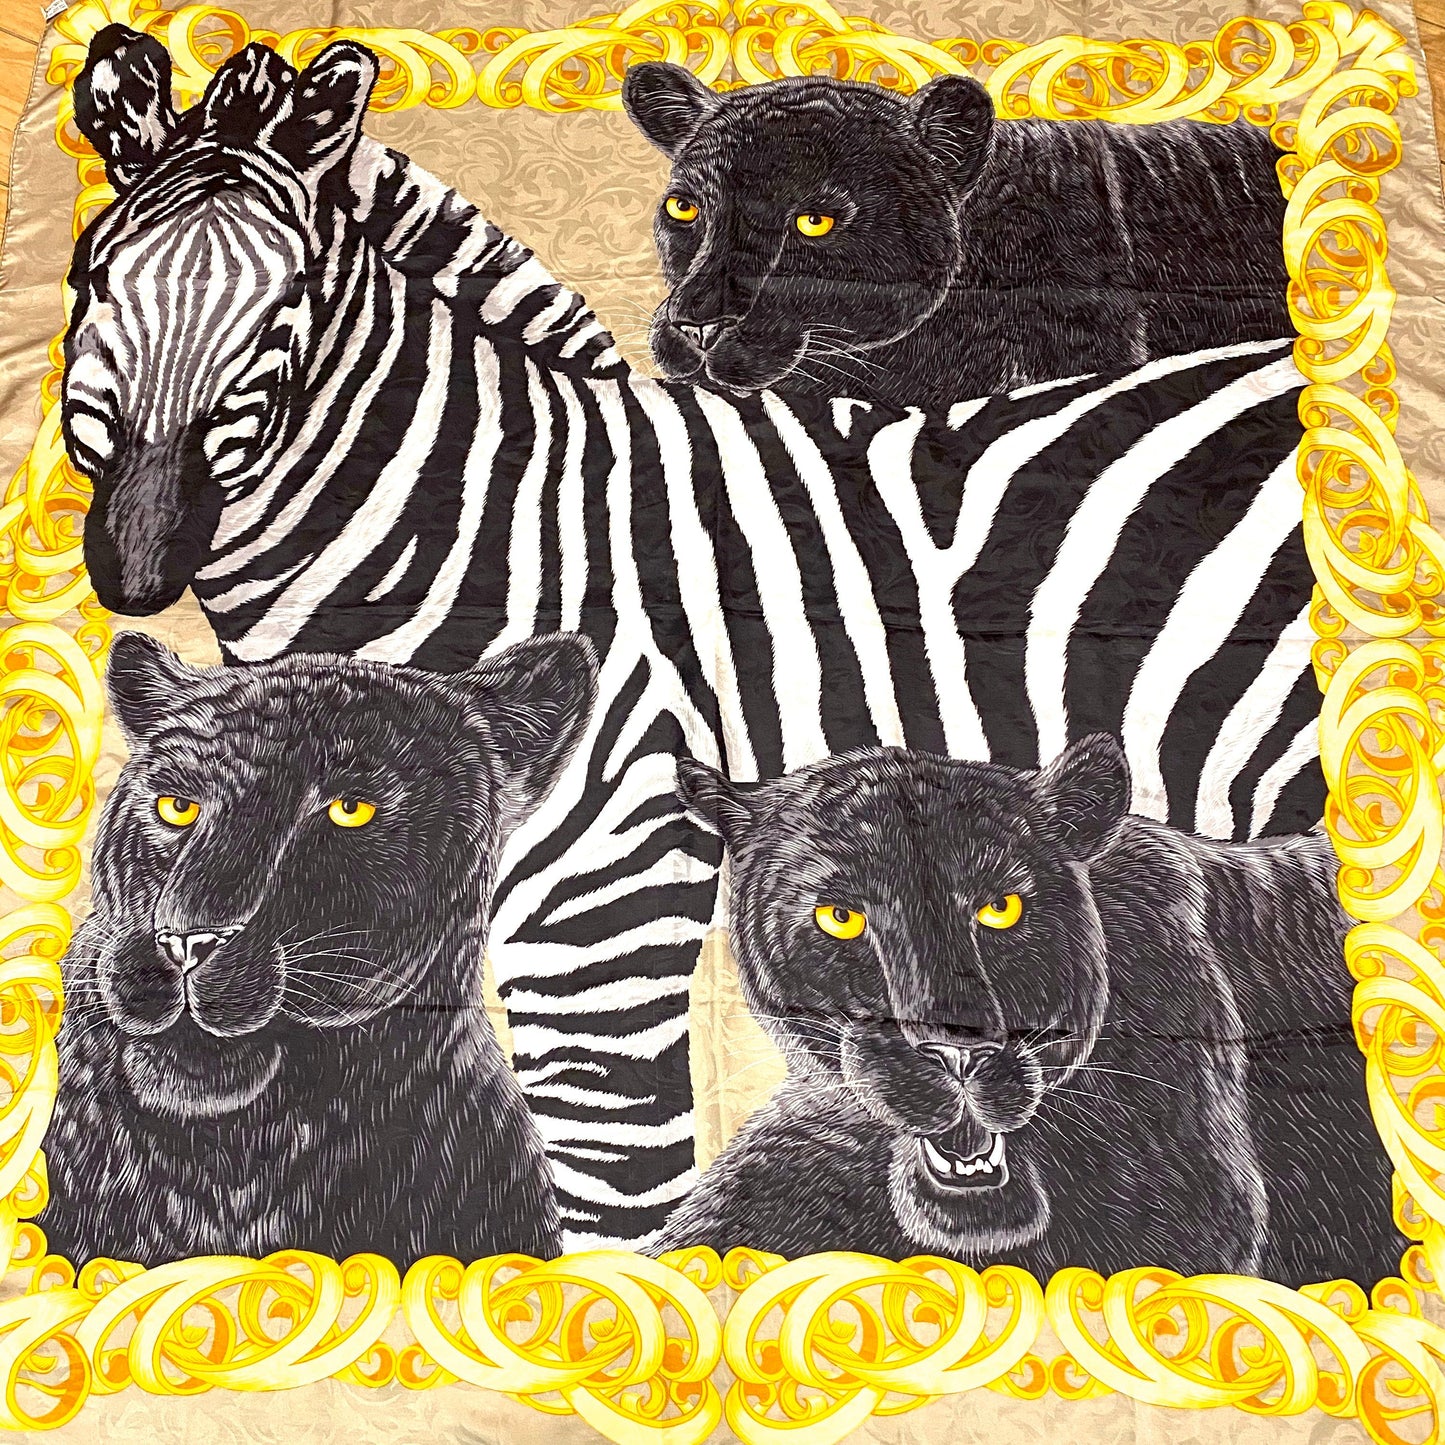 Incredible baroque frames jungle Zebra / Panther themed big silk scarf, 90s NOS Itaky